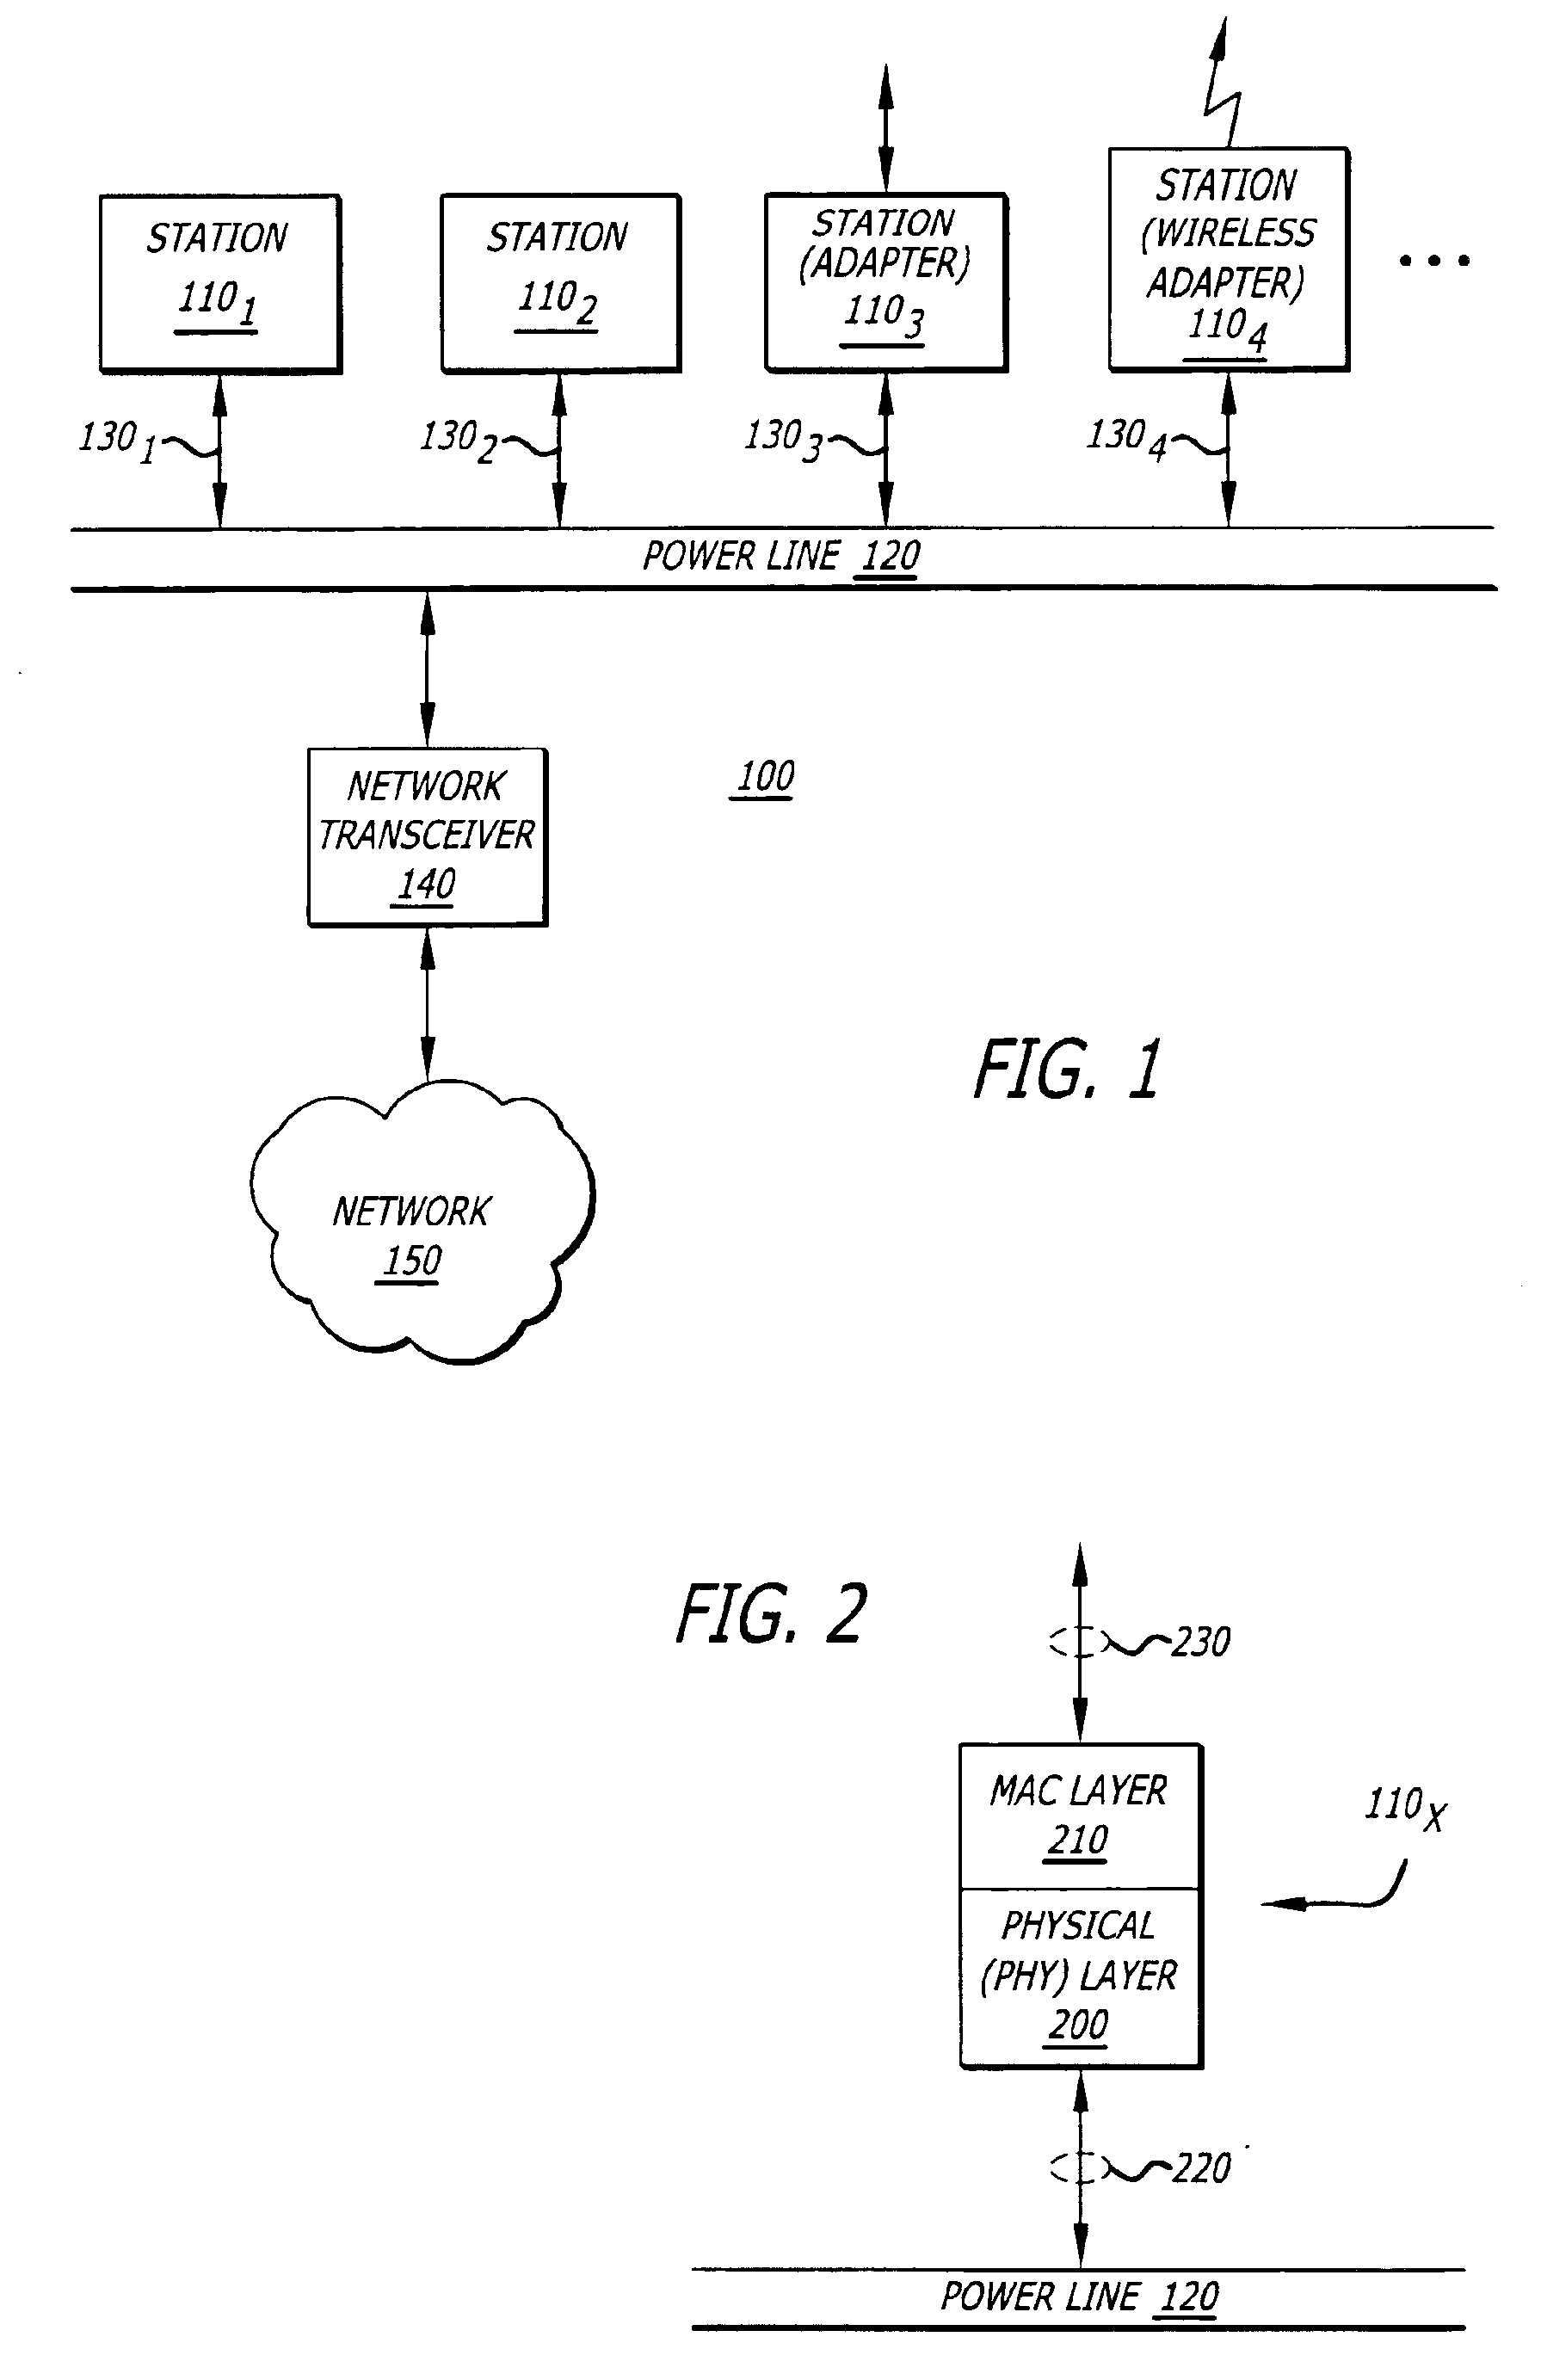 Apparatus and method for a low-rate data transmission mode over a power line